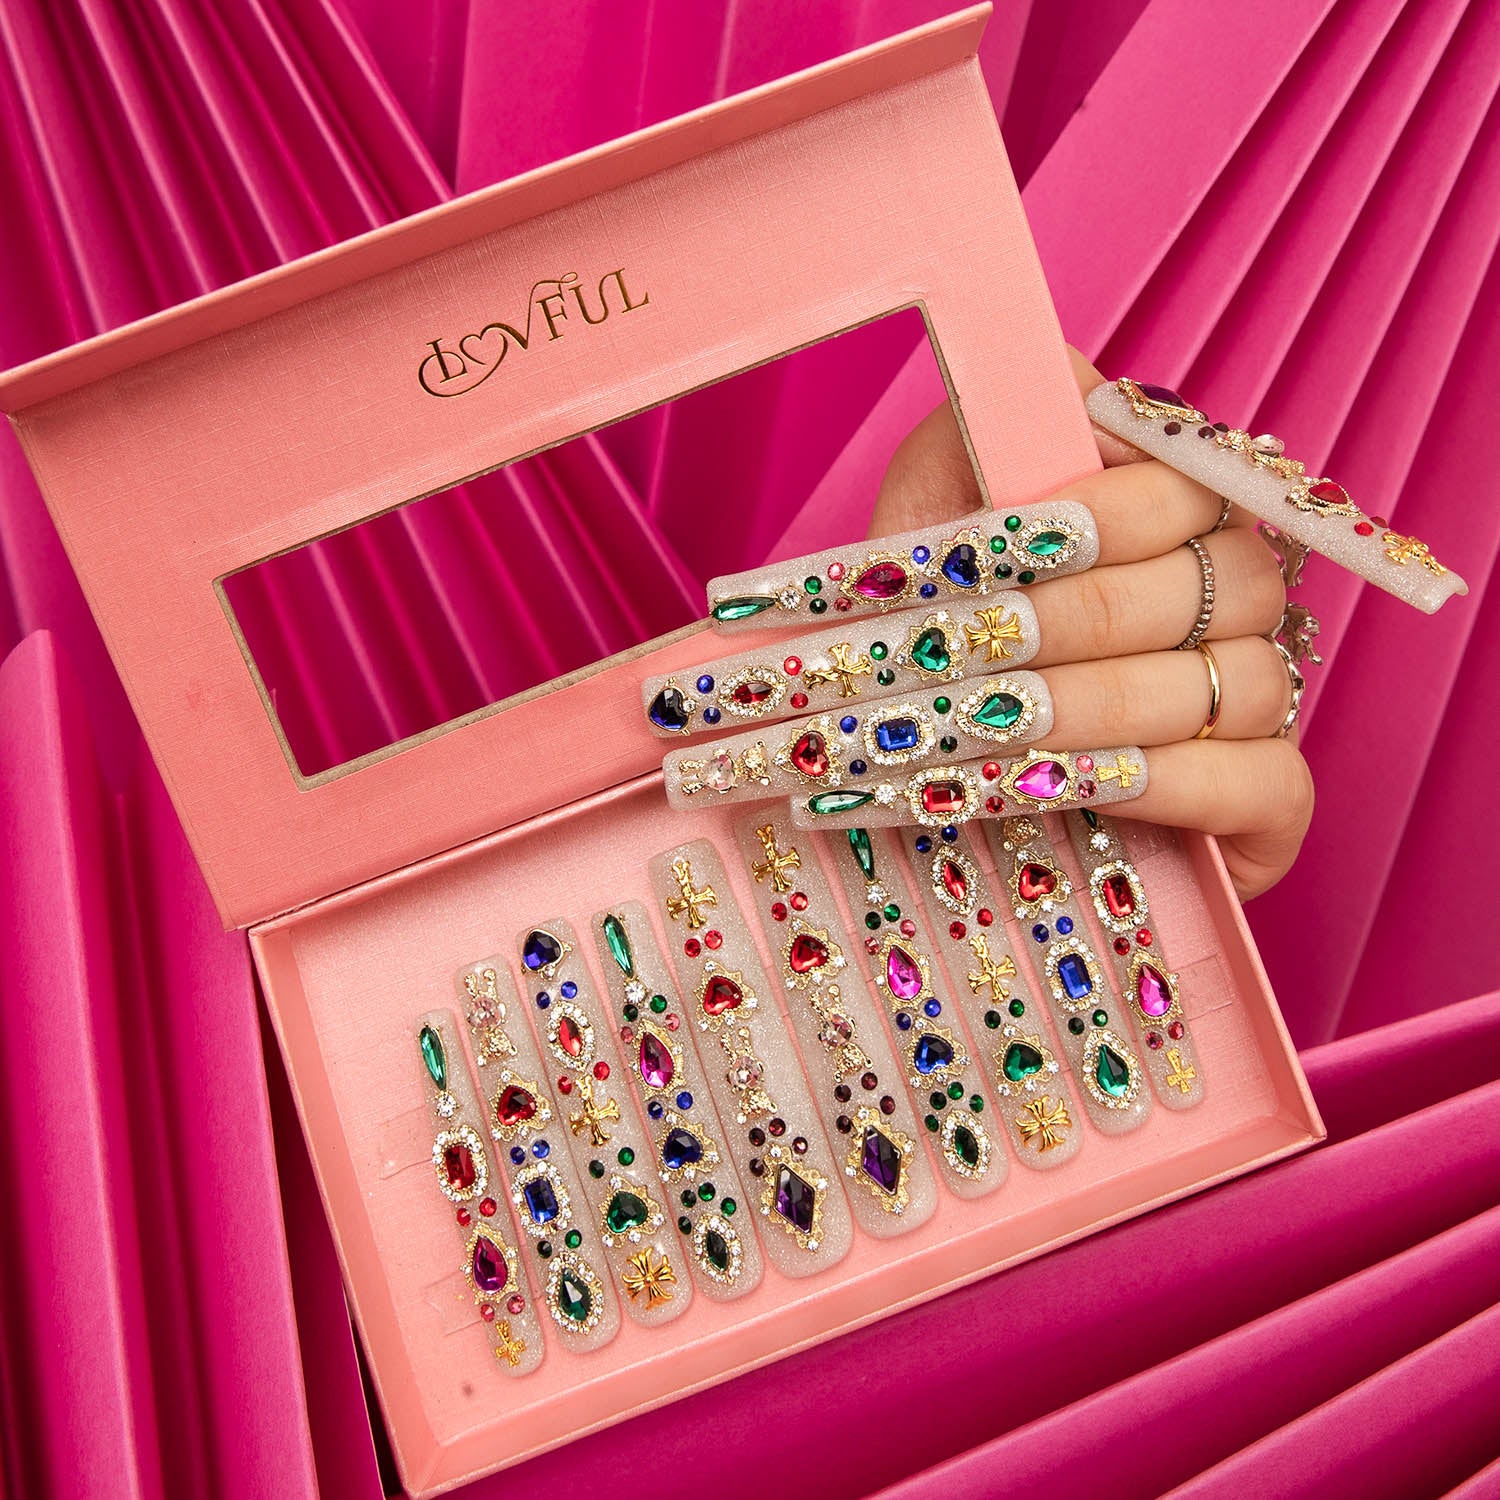 Hand showcasing H103 Treasure Trove square press-on nails by Lovful, decorated with colorful gems and glitter, set in a pink box against a pink pleated fabric background